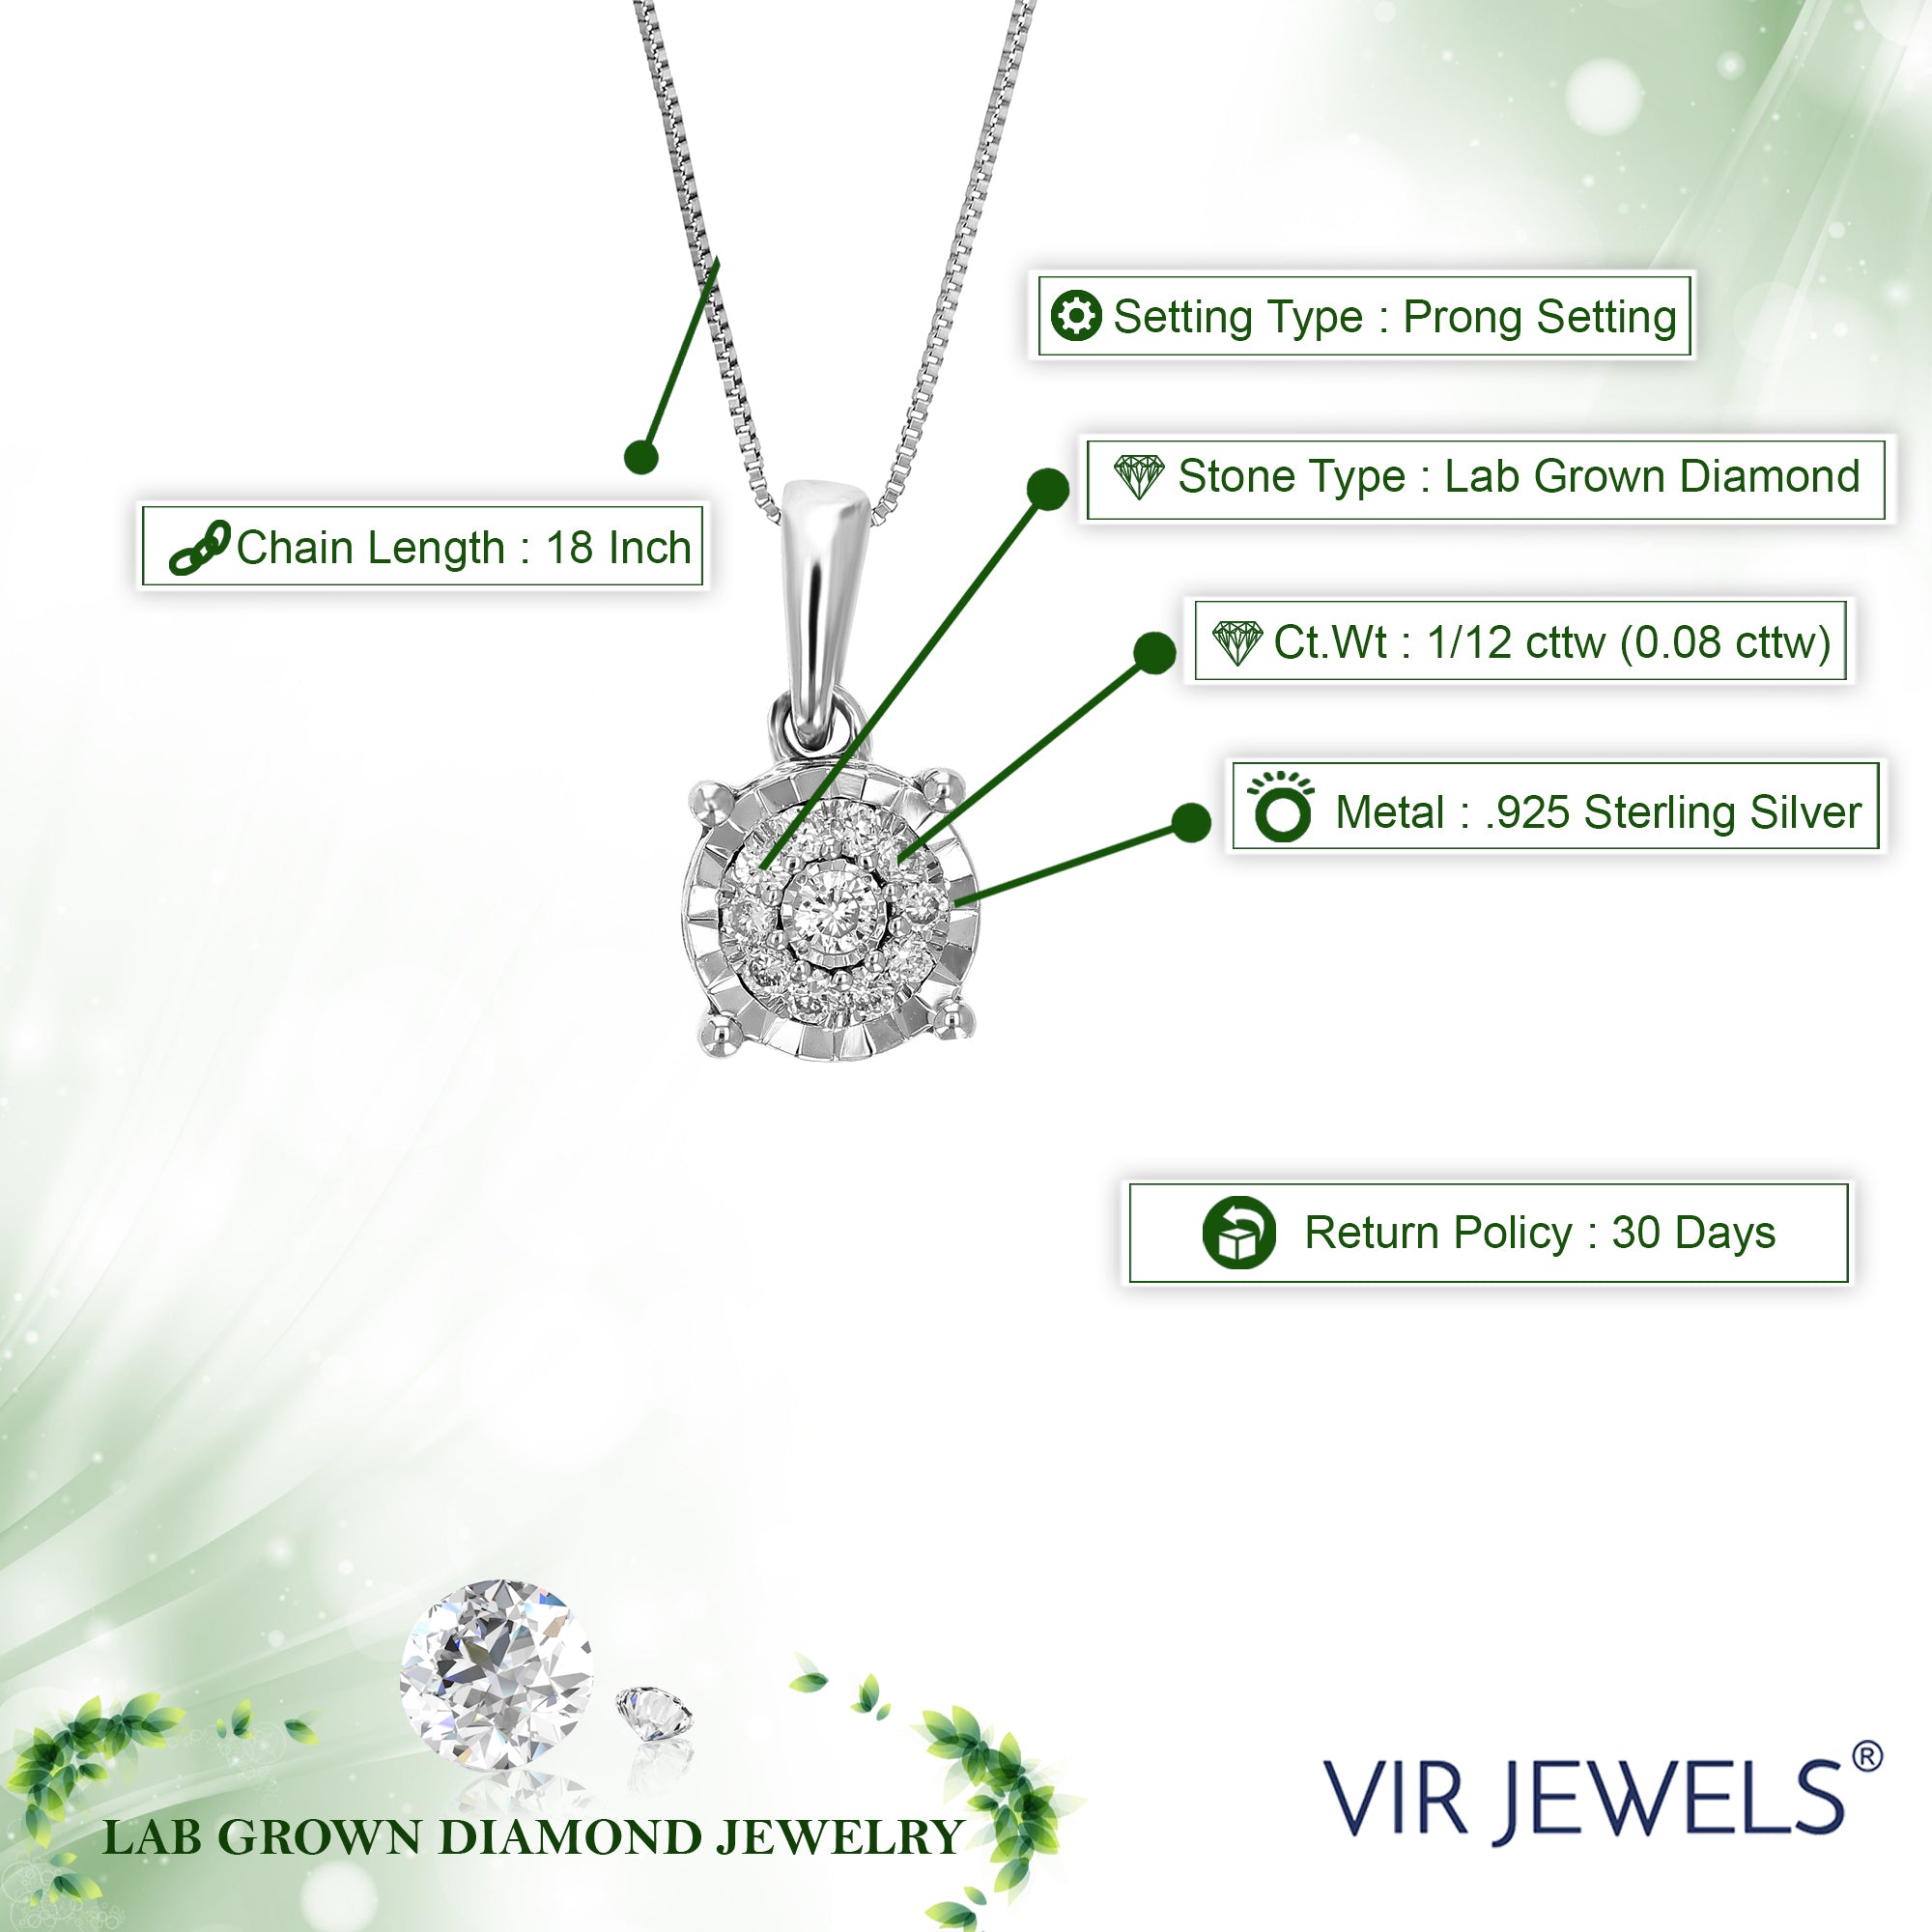 1/12 cttw Lab Grown Diamond Fashion Pendant Necklace .925 Sterling Silver 1/4 Inch with 18 Inch Chain, Size 2/5 Inch